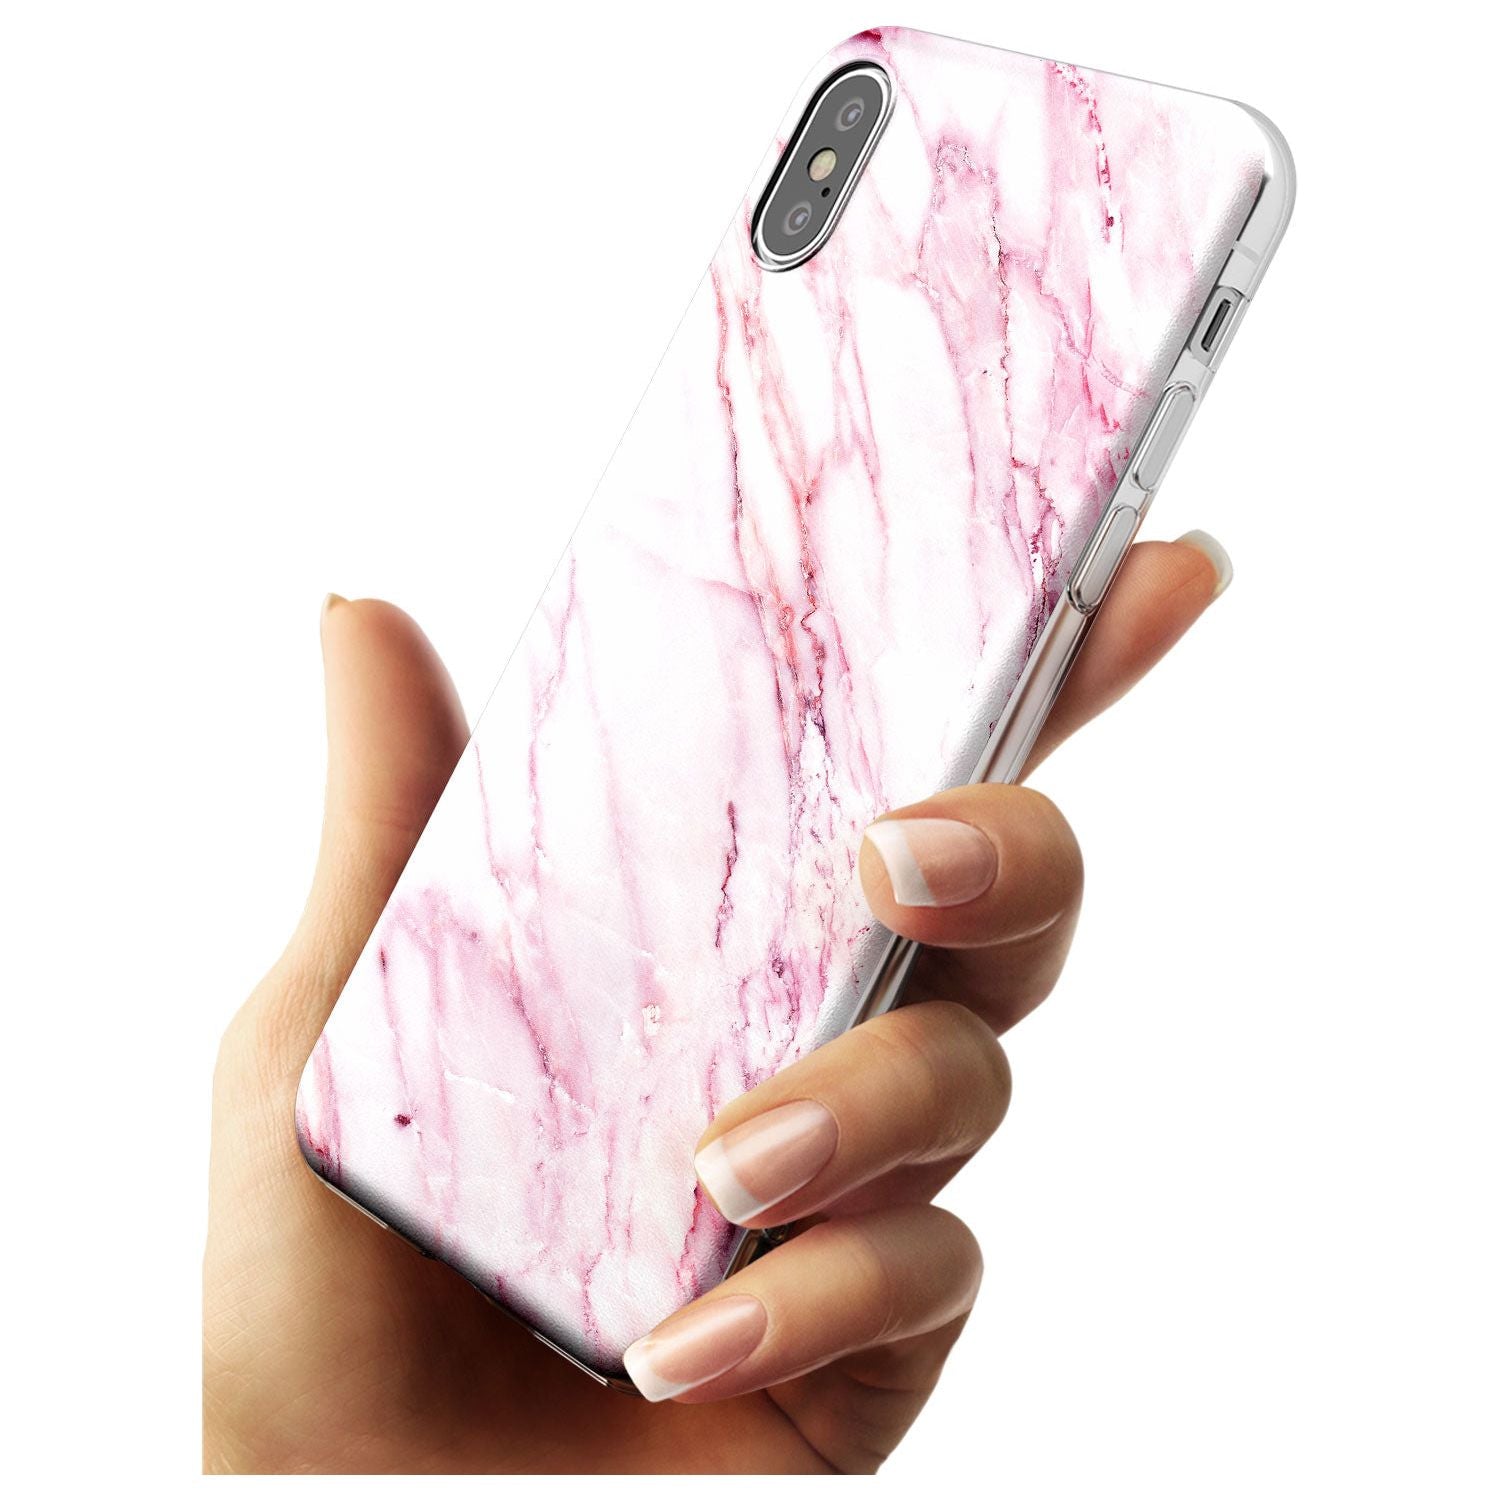 White & Pink Onyx Marble Texture Black Impact Phone Case for iPhone X XS Max XR